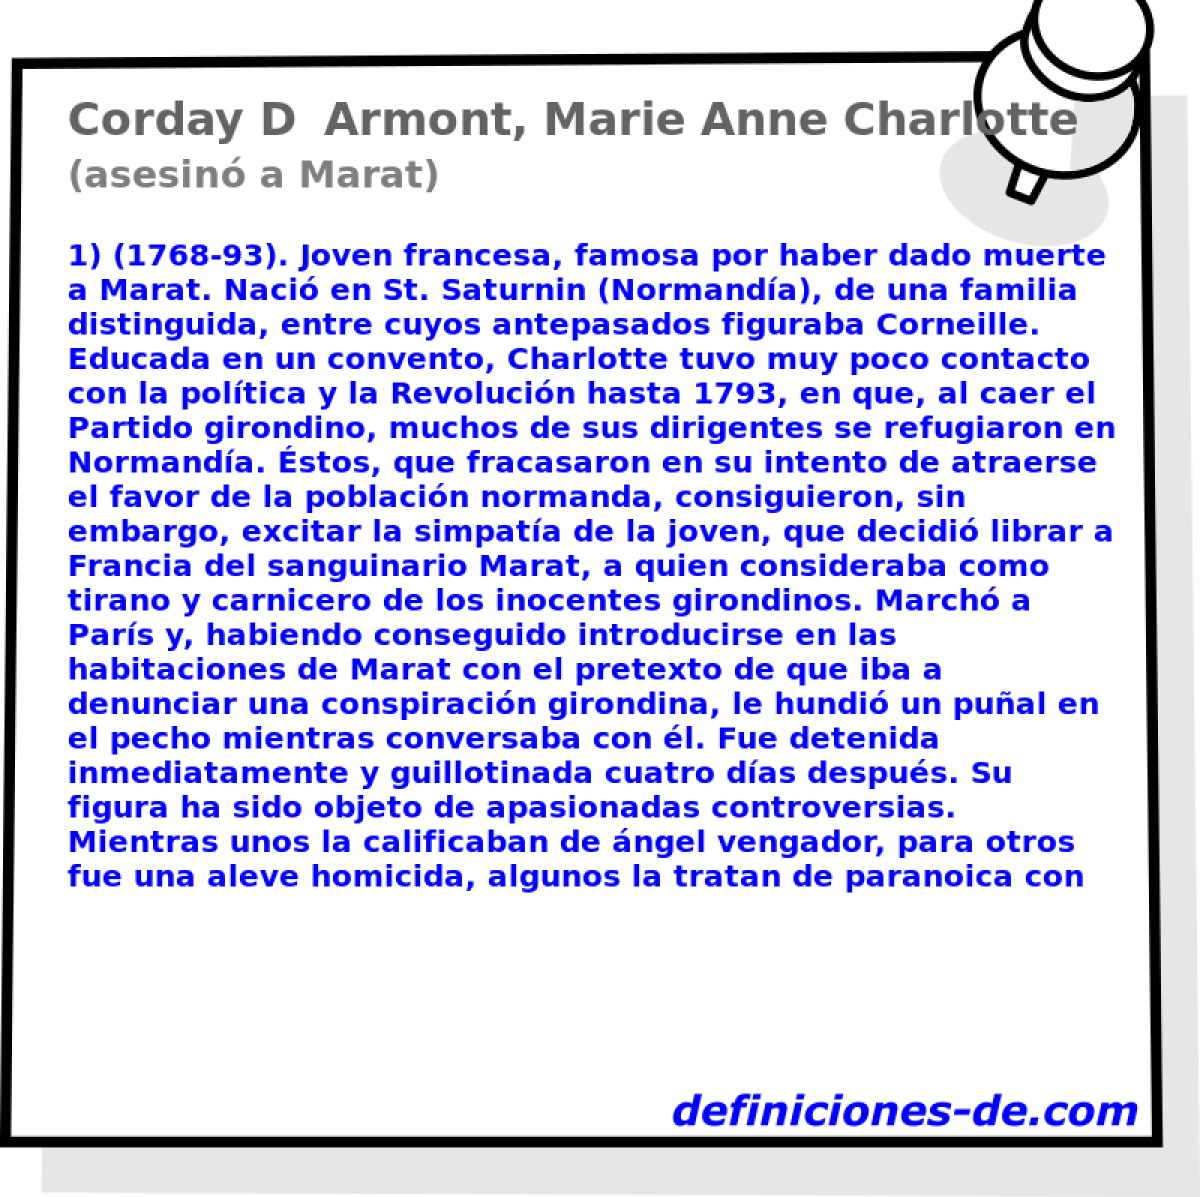 Corday DArmont, Marie Anne Charlotte (asesin a Marat)